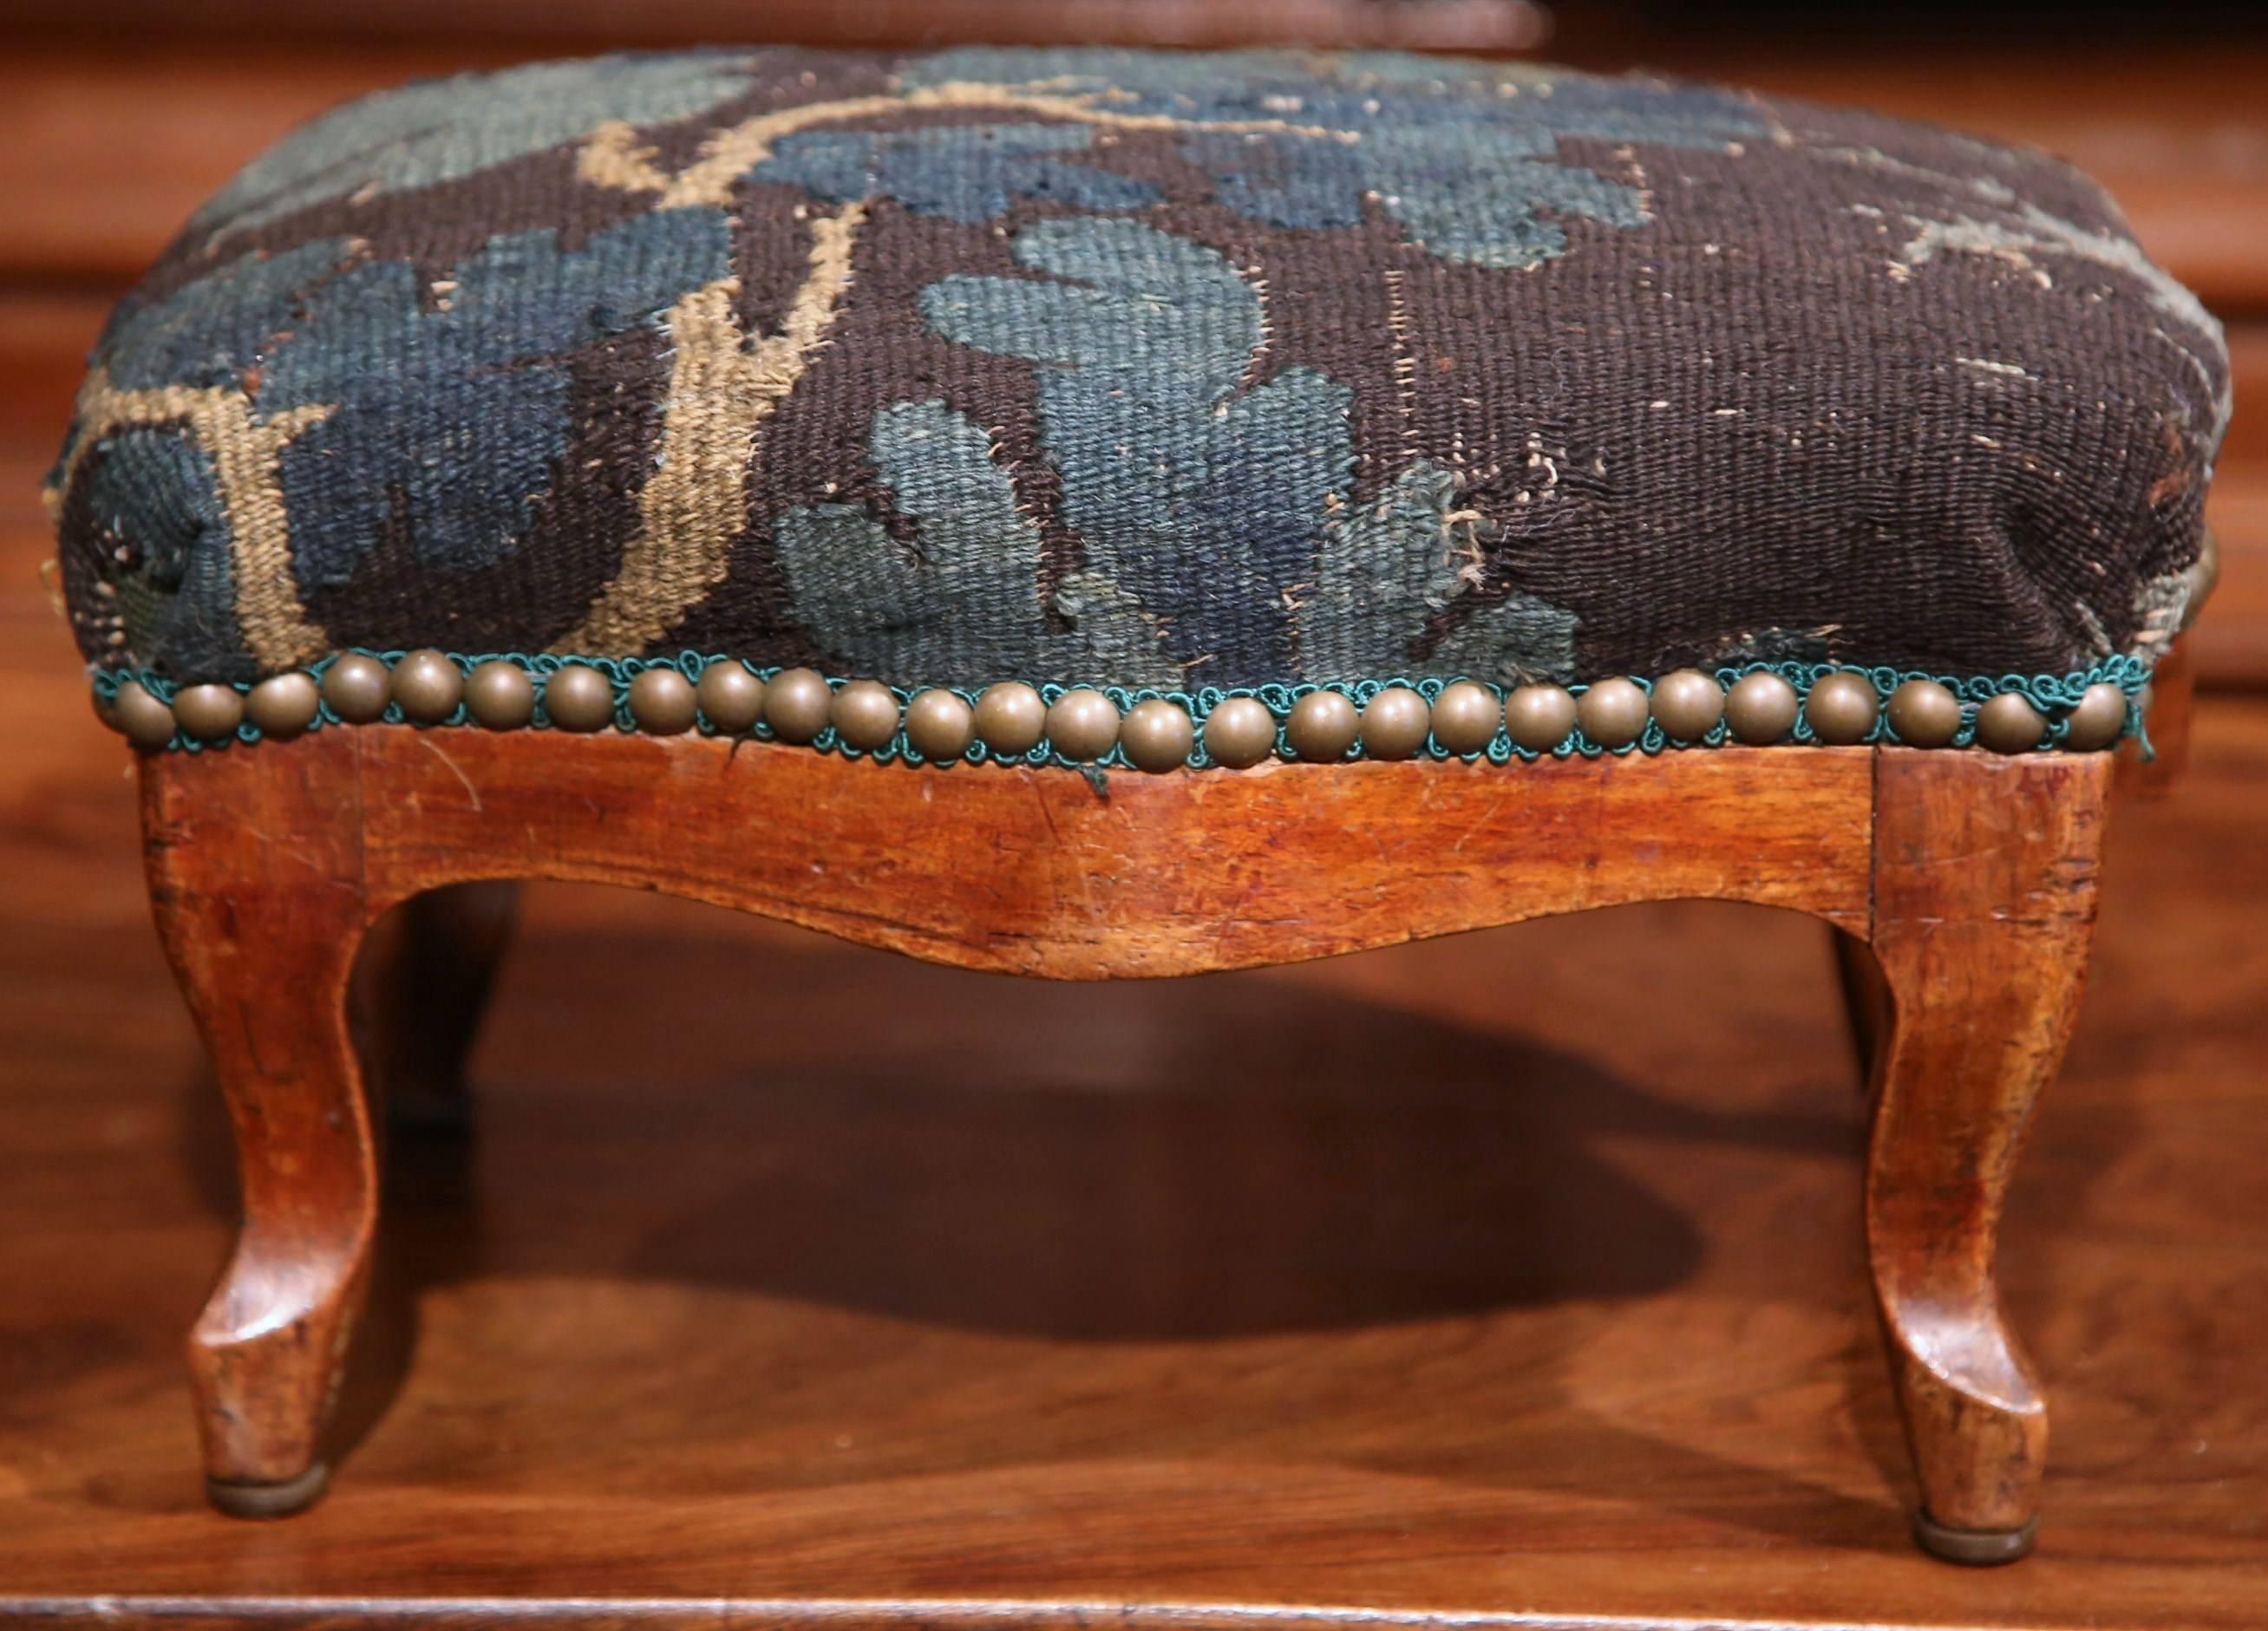 This elegant, antique footstool was crafted in Lyon, France, circa 1860. The carved, square footrest has been reupholstered with old Aubusson fragment in a soft blue and green palette. The piece is in excellent condition with a rich walnut patina